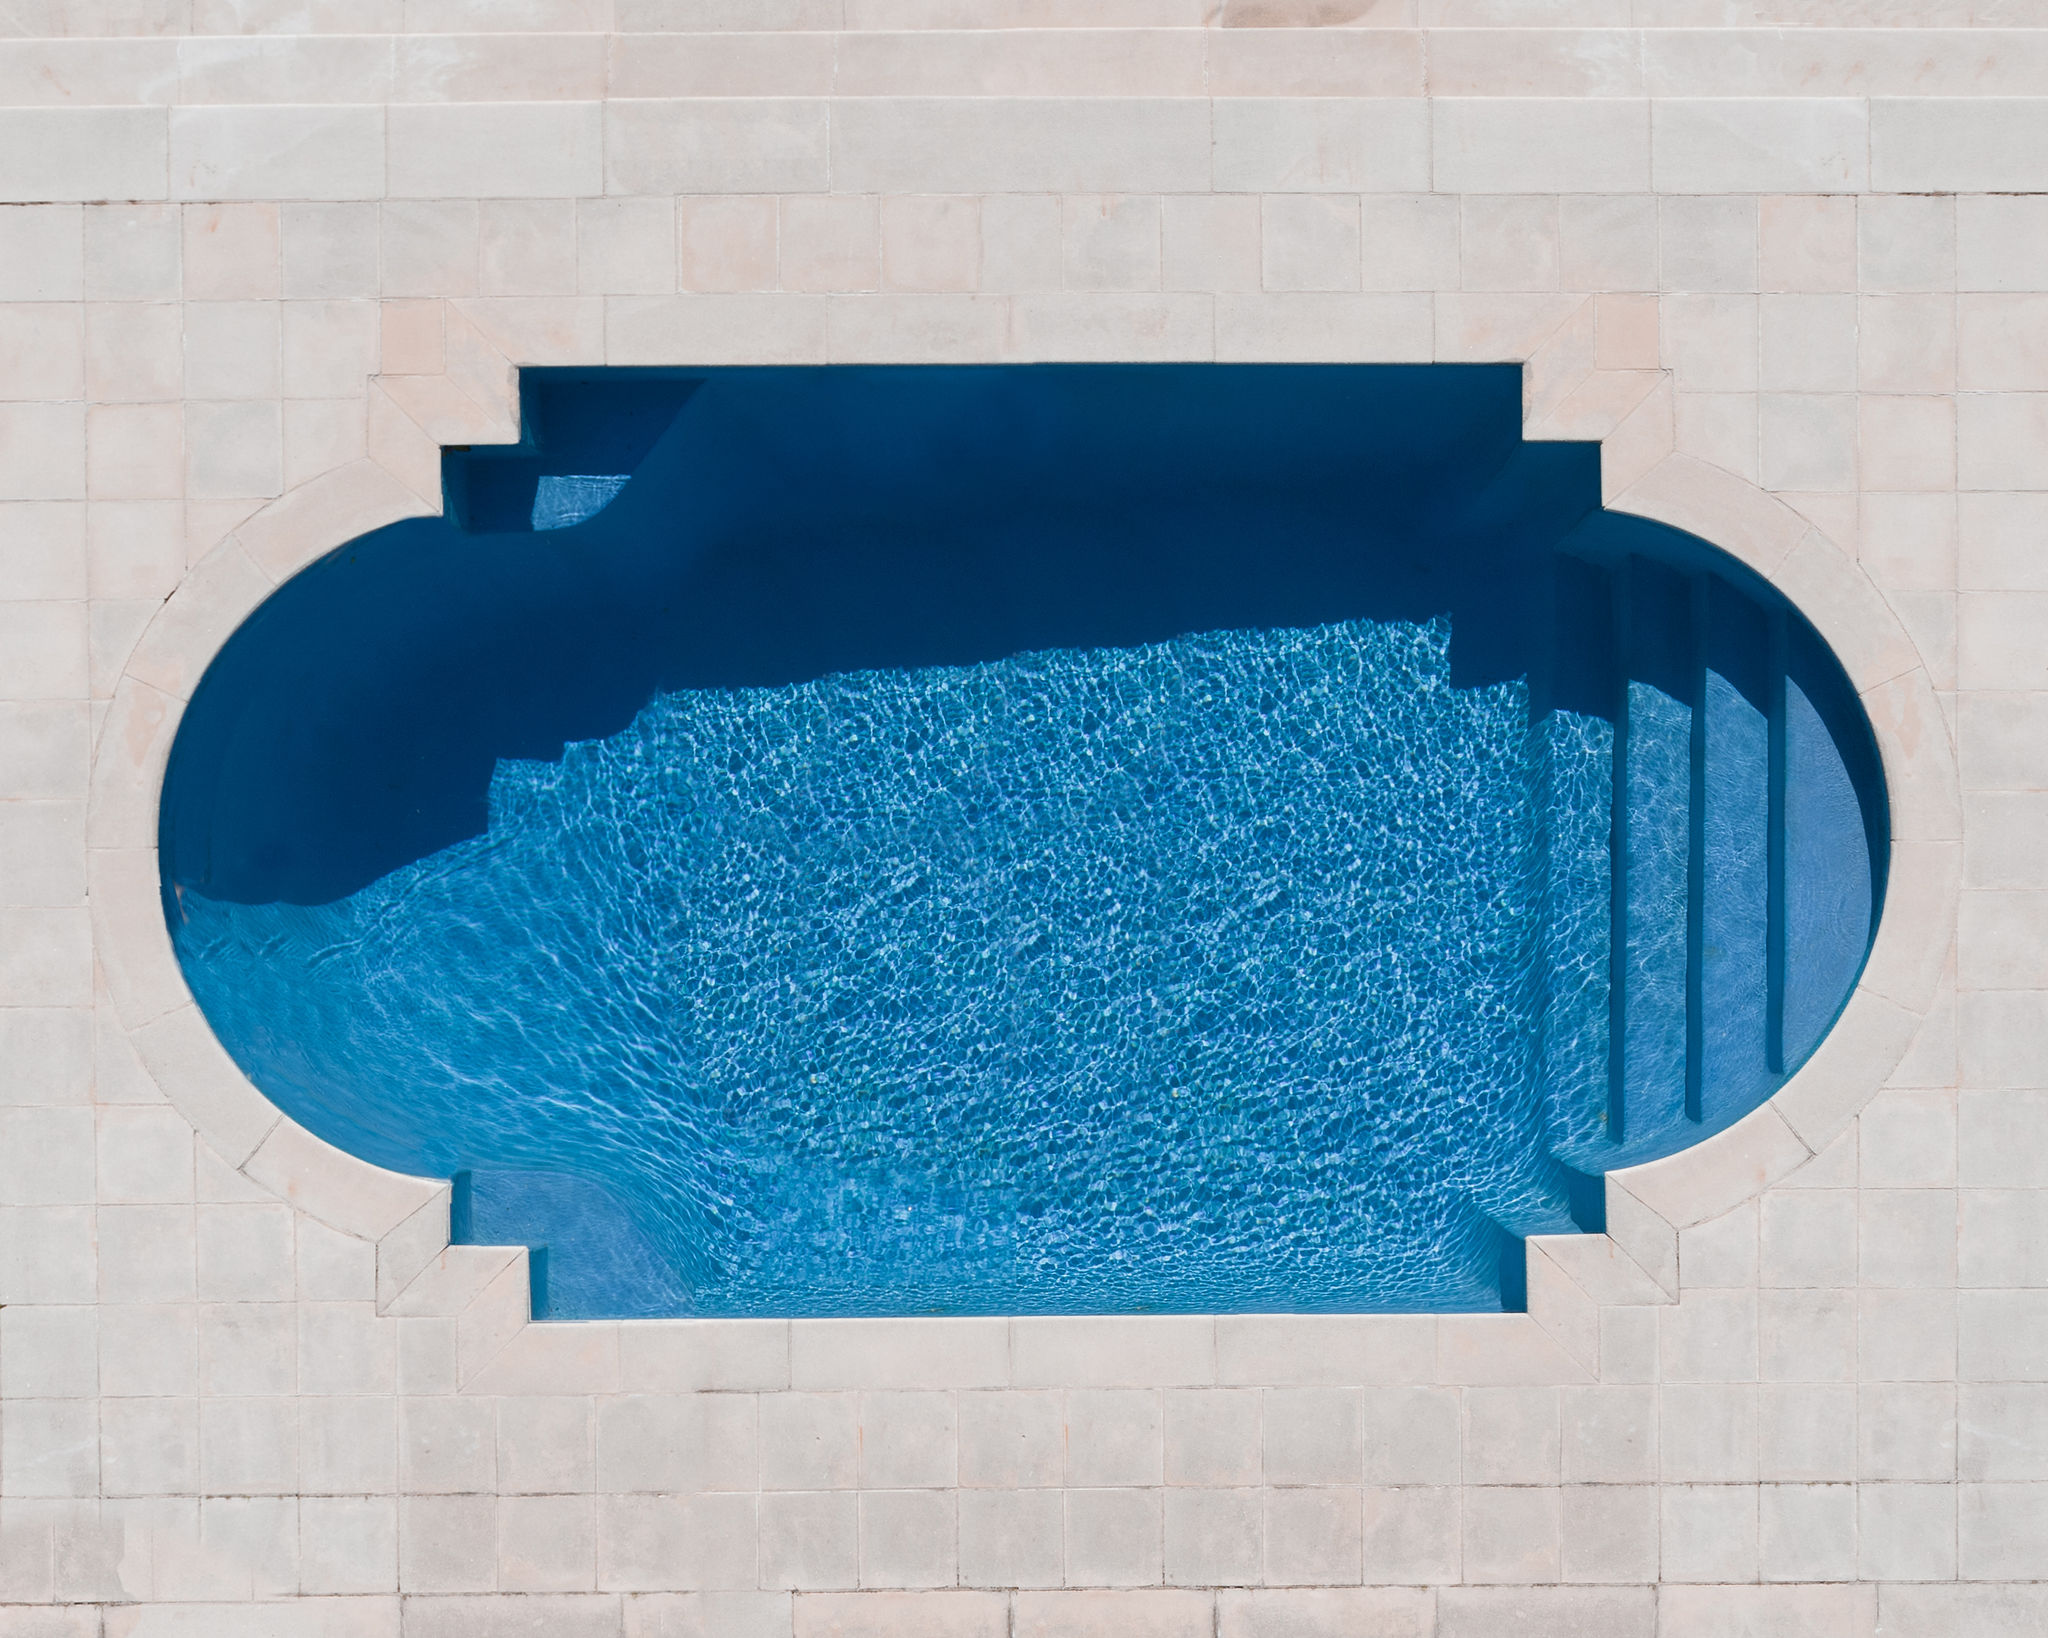 He recently released a new series of photos – an ode to the beauty found in the shapes, colors, and textures of swimming pools.